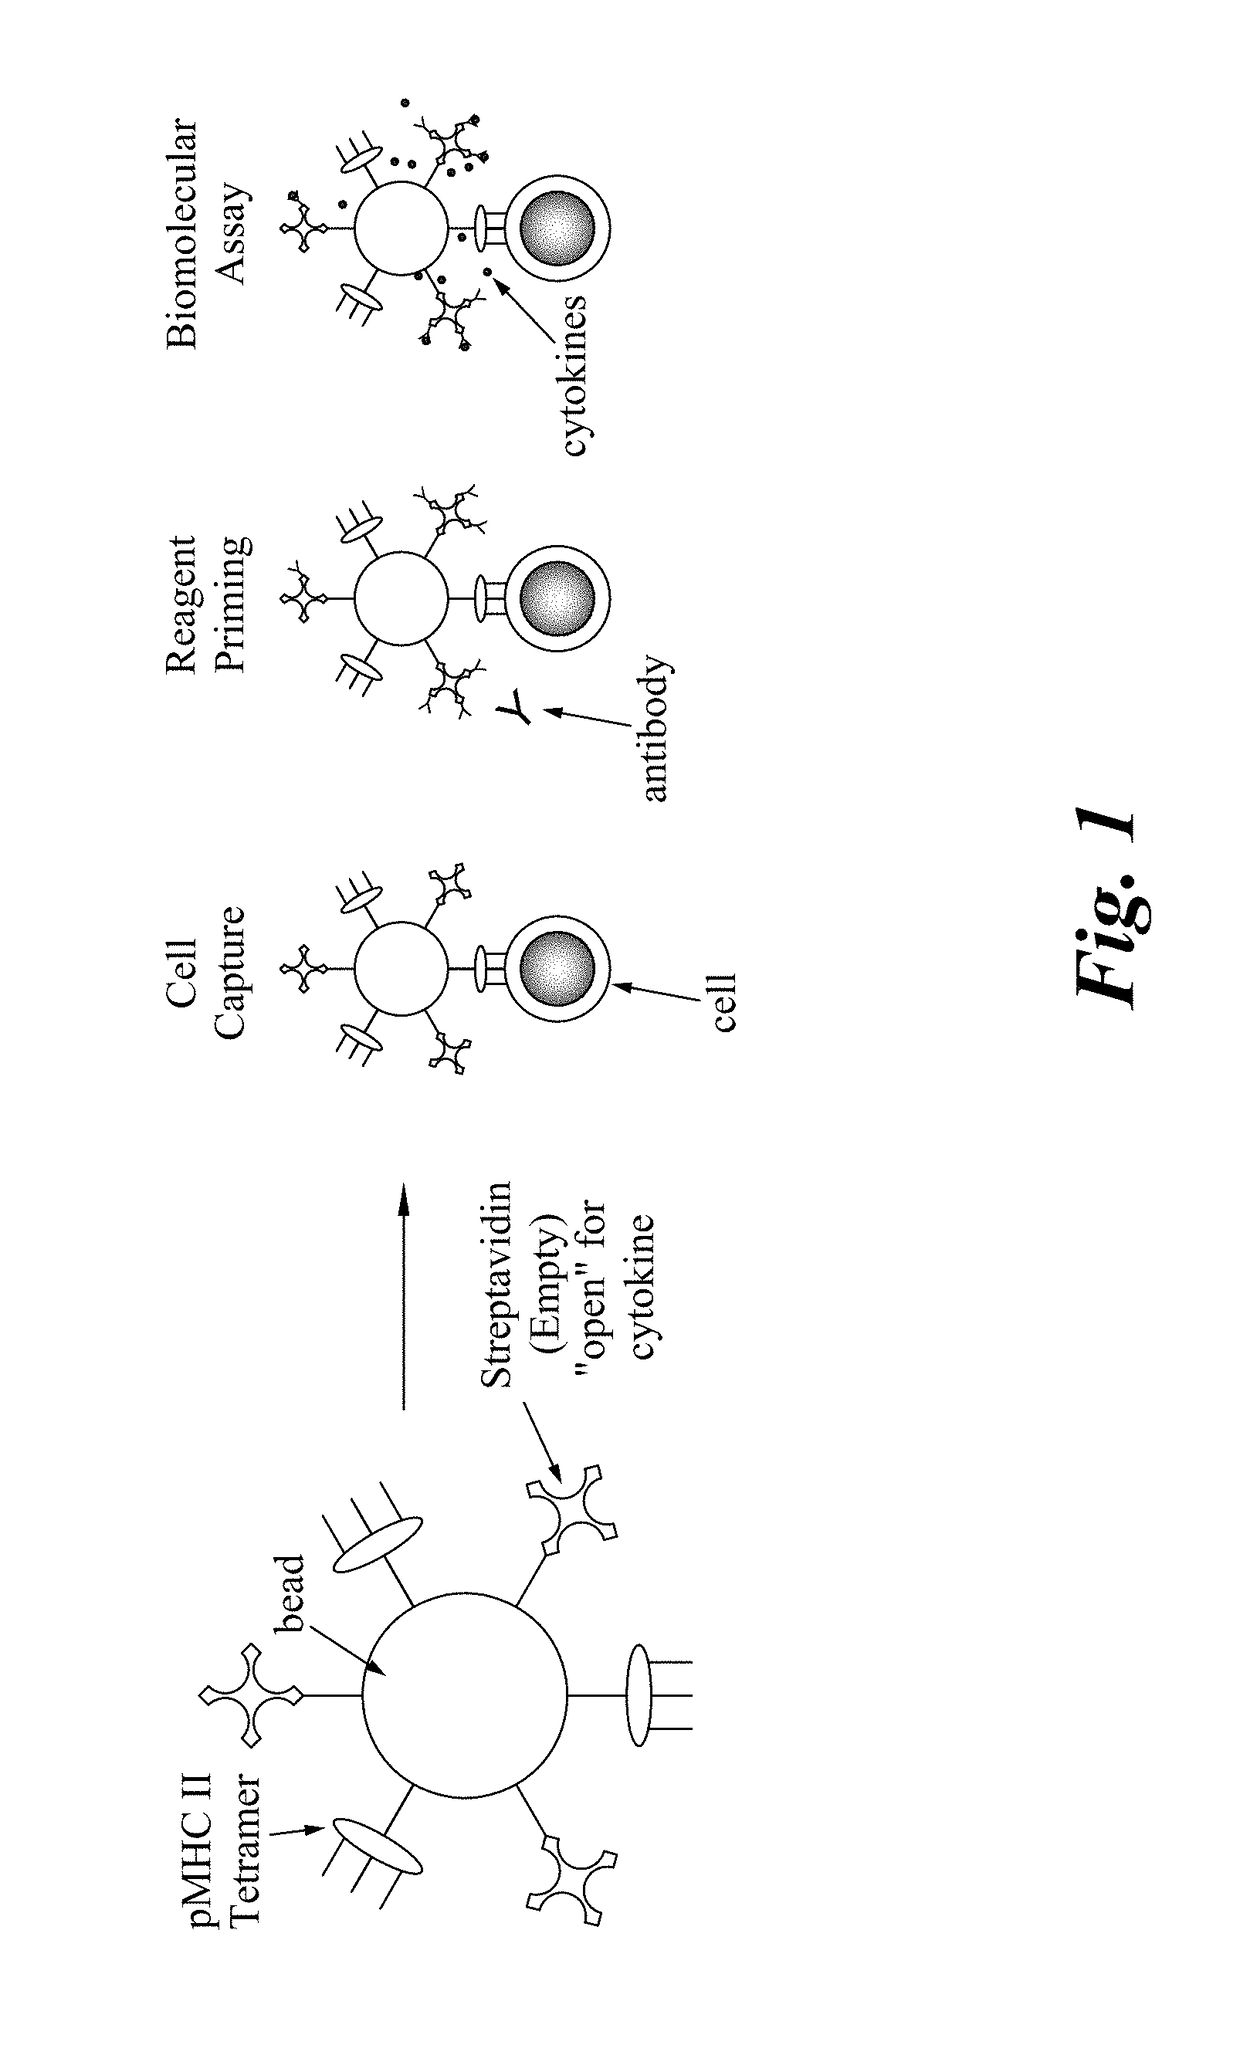 Multifunctional beads and methods of use for capturing rare cells